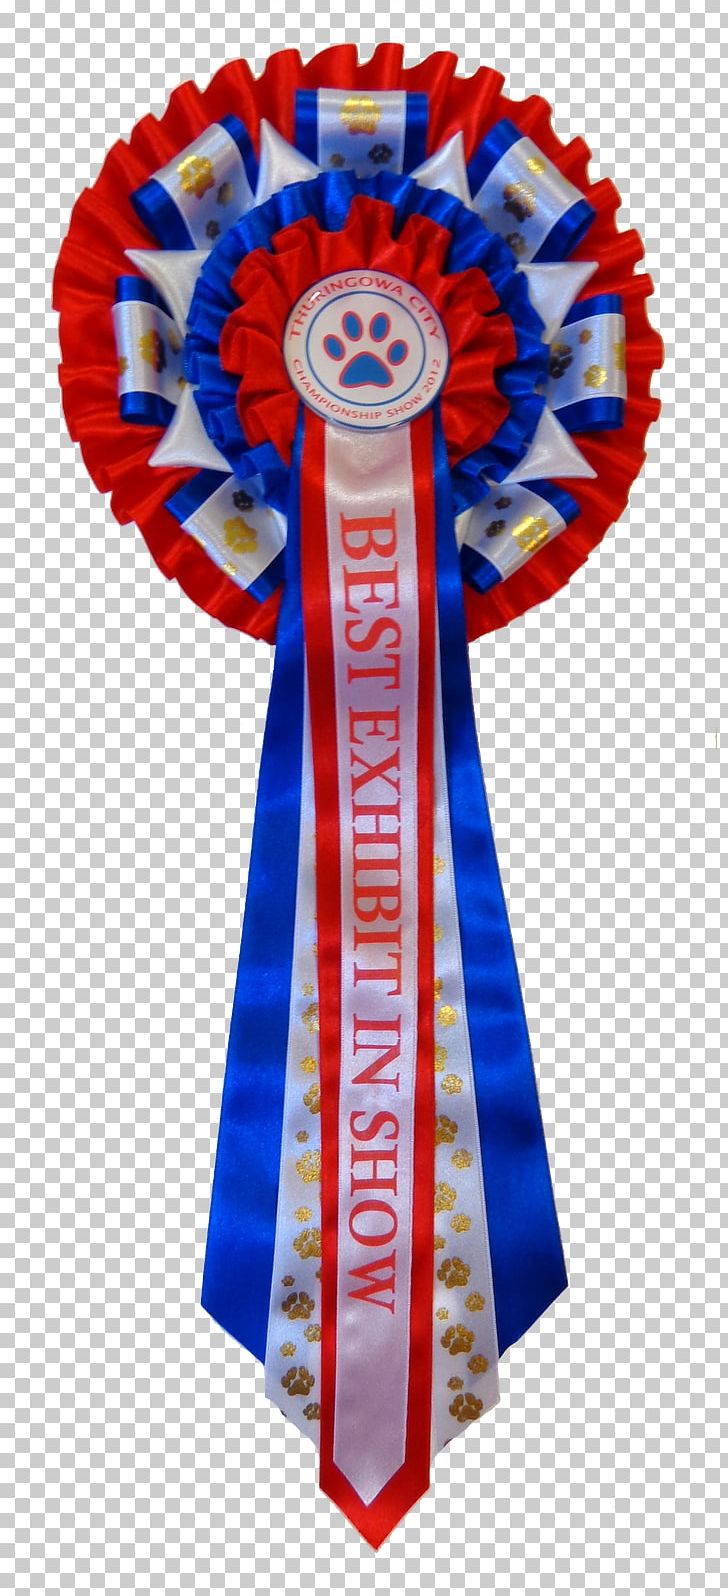 Rosette Ribbon Conformation Show Dog Lapel Pin PNG, Clipart, Alibaba Group, Animal, Balloon, Best In Show, Blue Free PNG Download